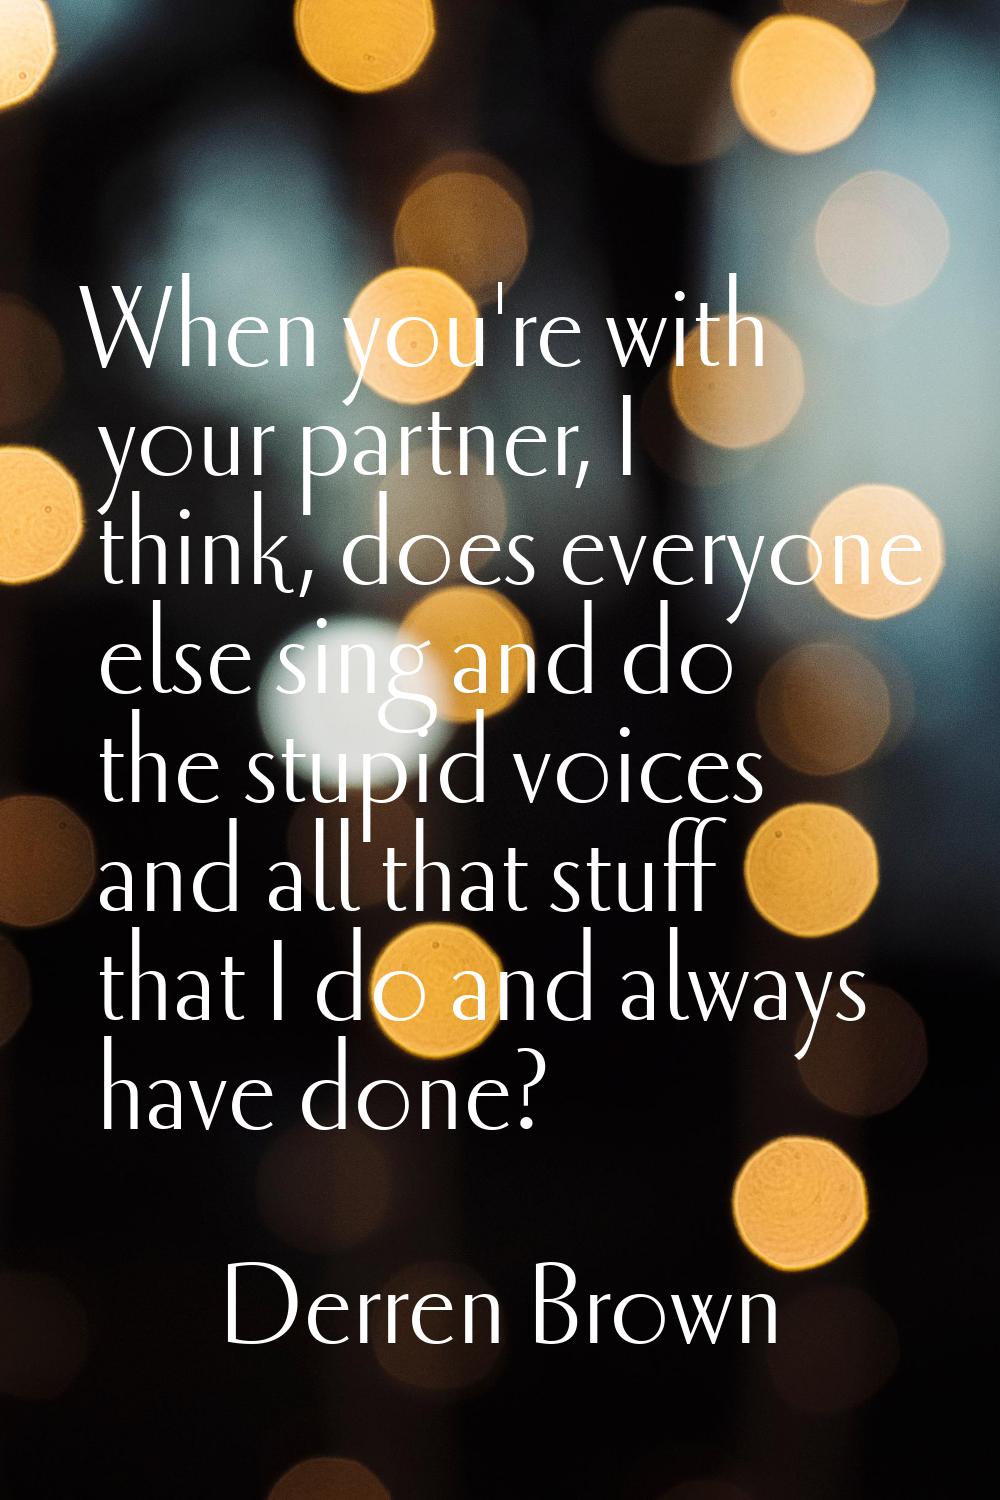 When you're with your partner, I think, does everyone else sing and do the stupid voices and all th